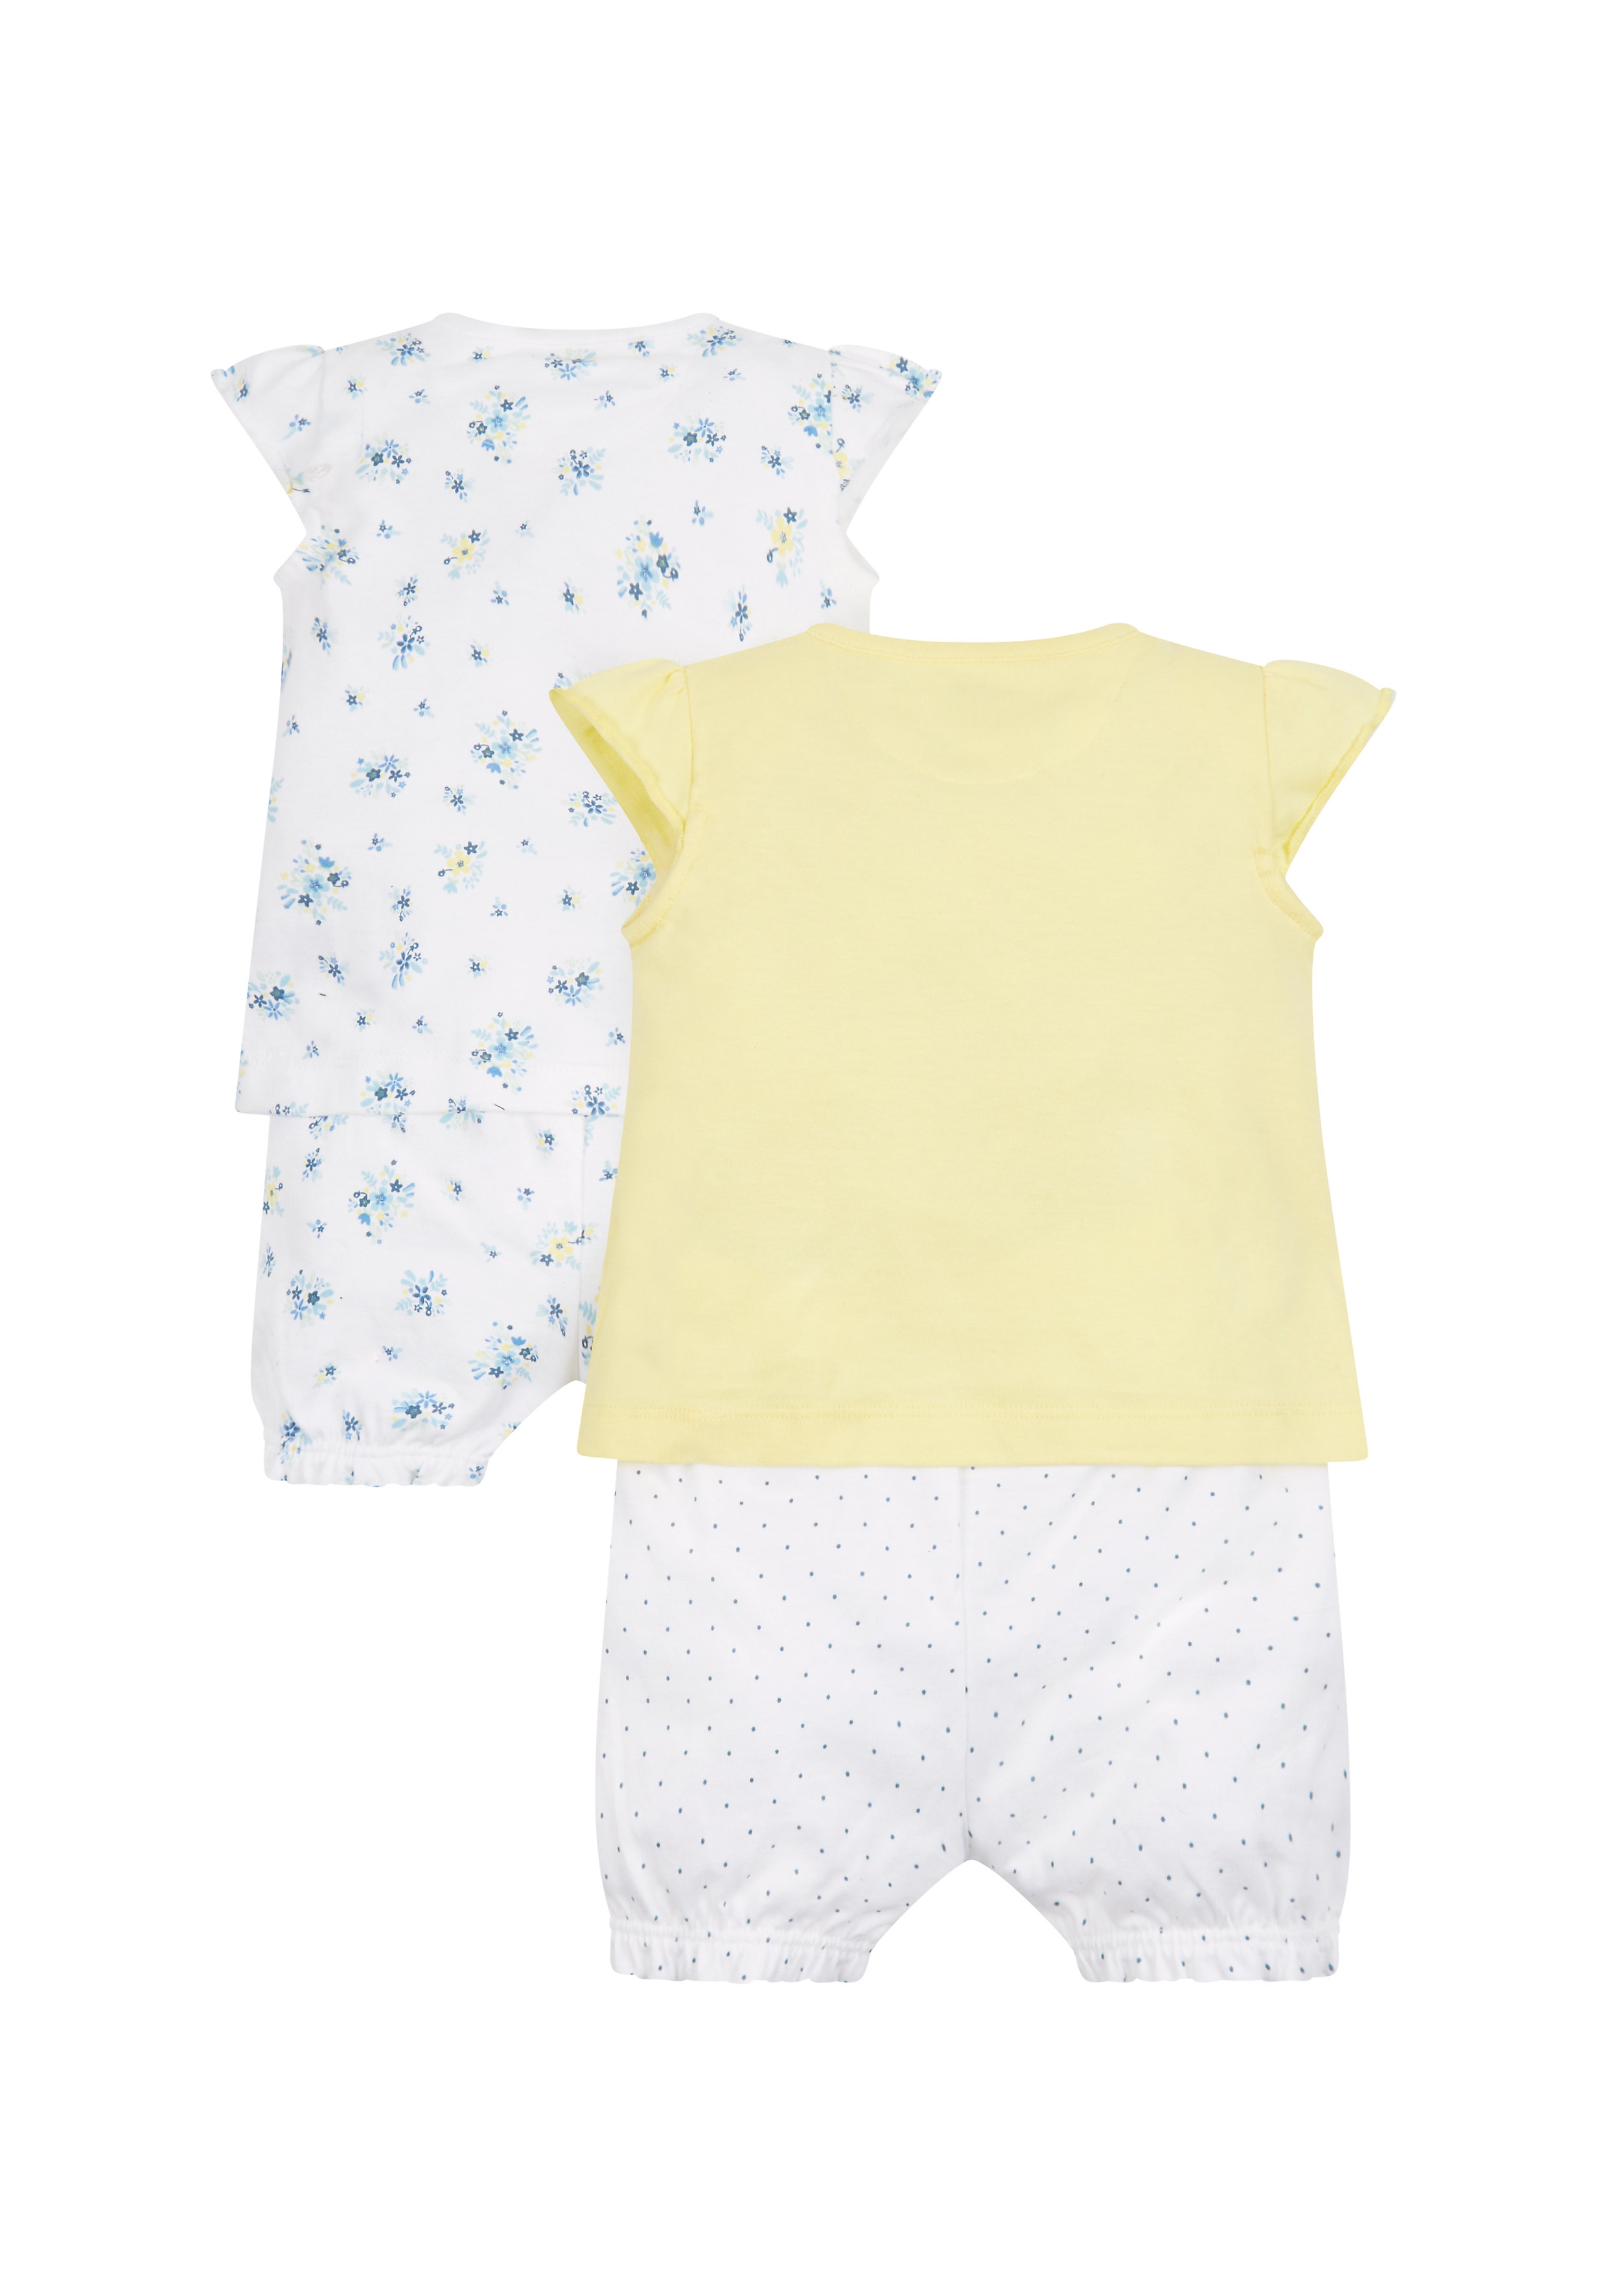 White and Yellow Printed Nightsuit - Pack of 2